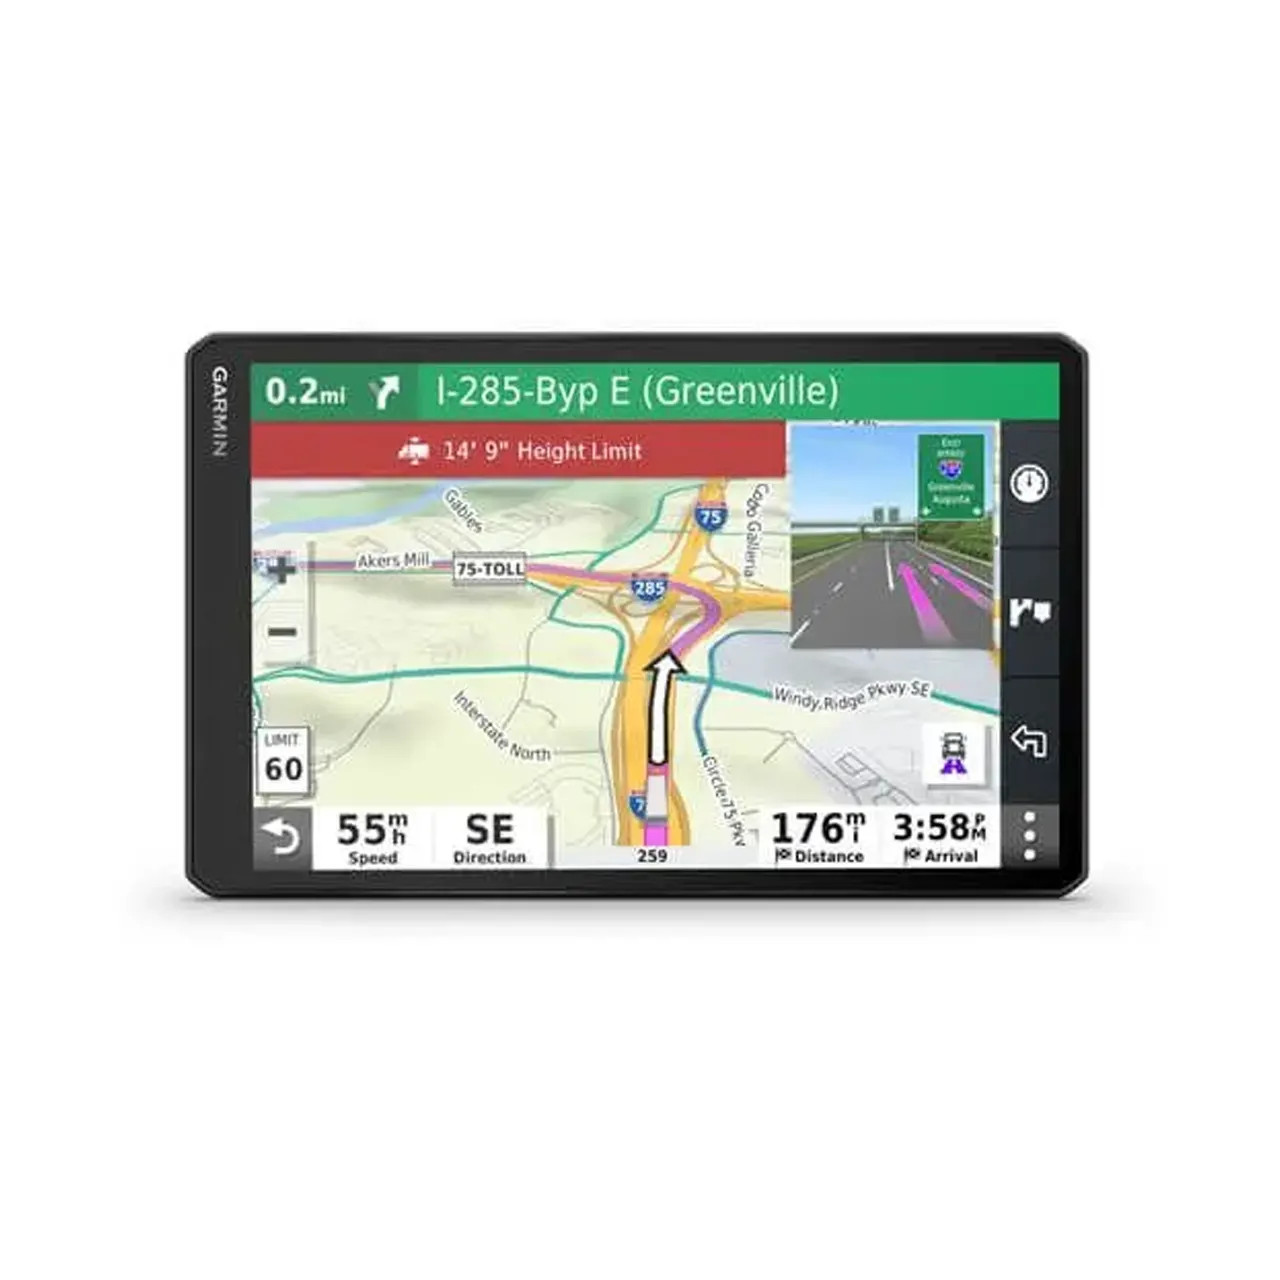 Dezl OTR1000 - 10-inch GPS Truck Navigator - Custom Truck Routing and Load-to-Dock - EZEE.com: High-end made ezee!